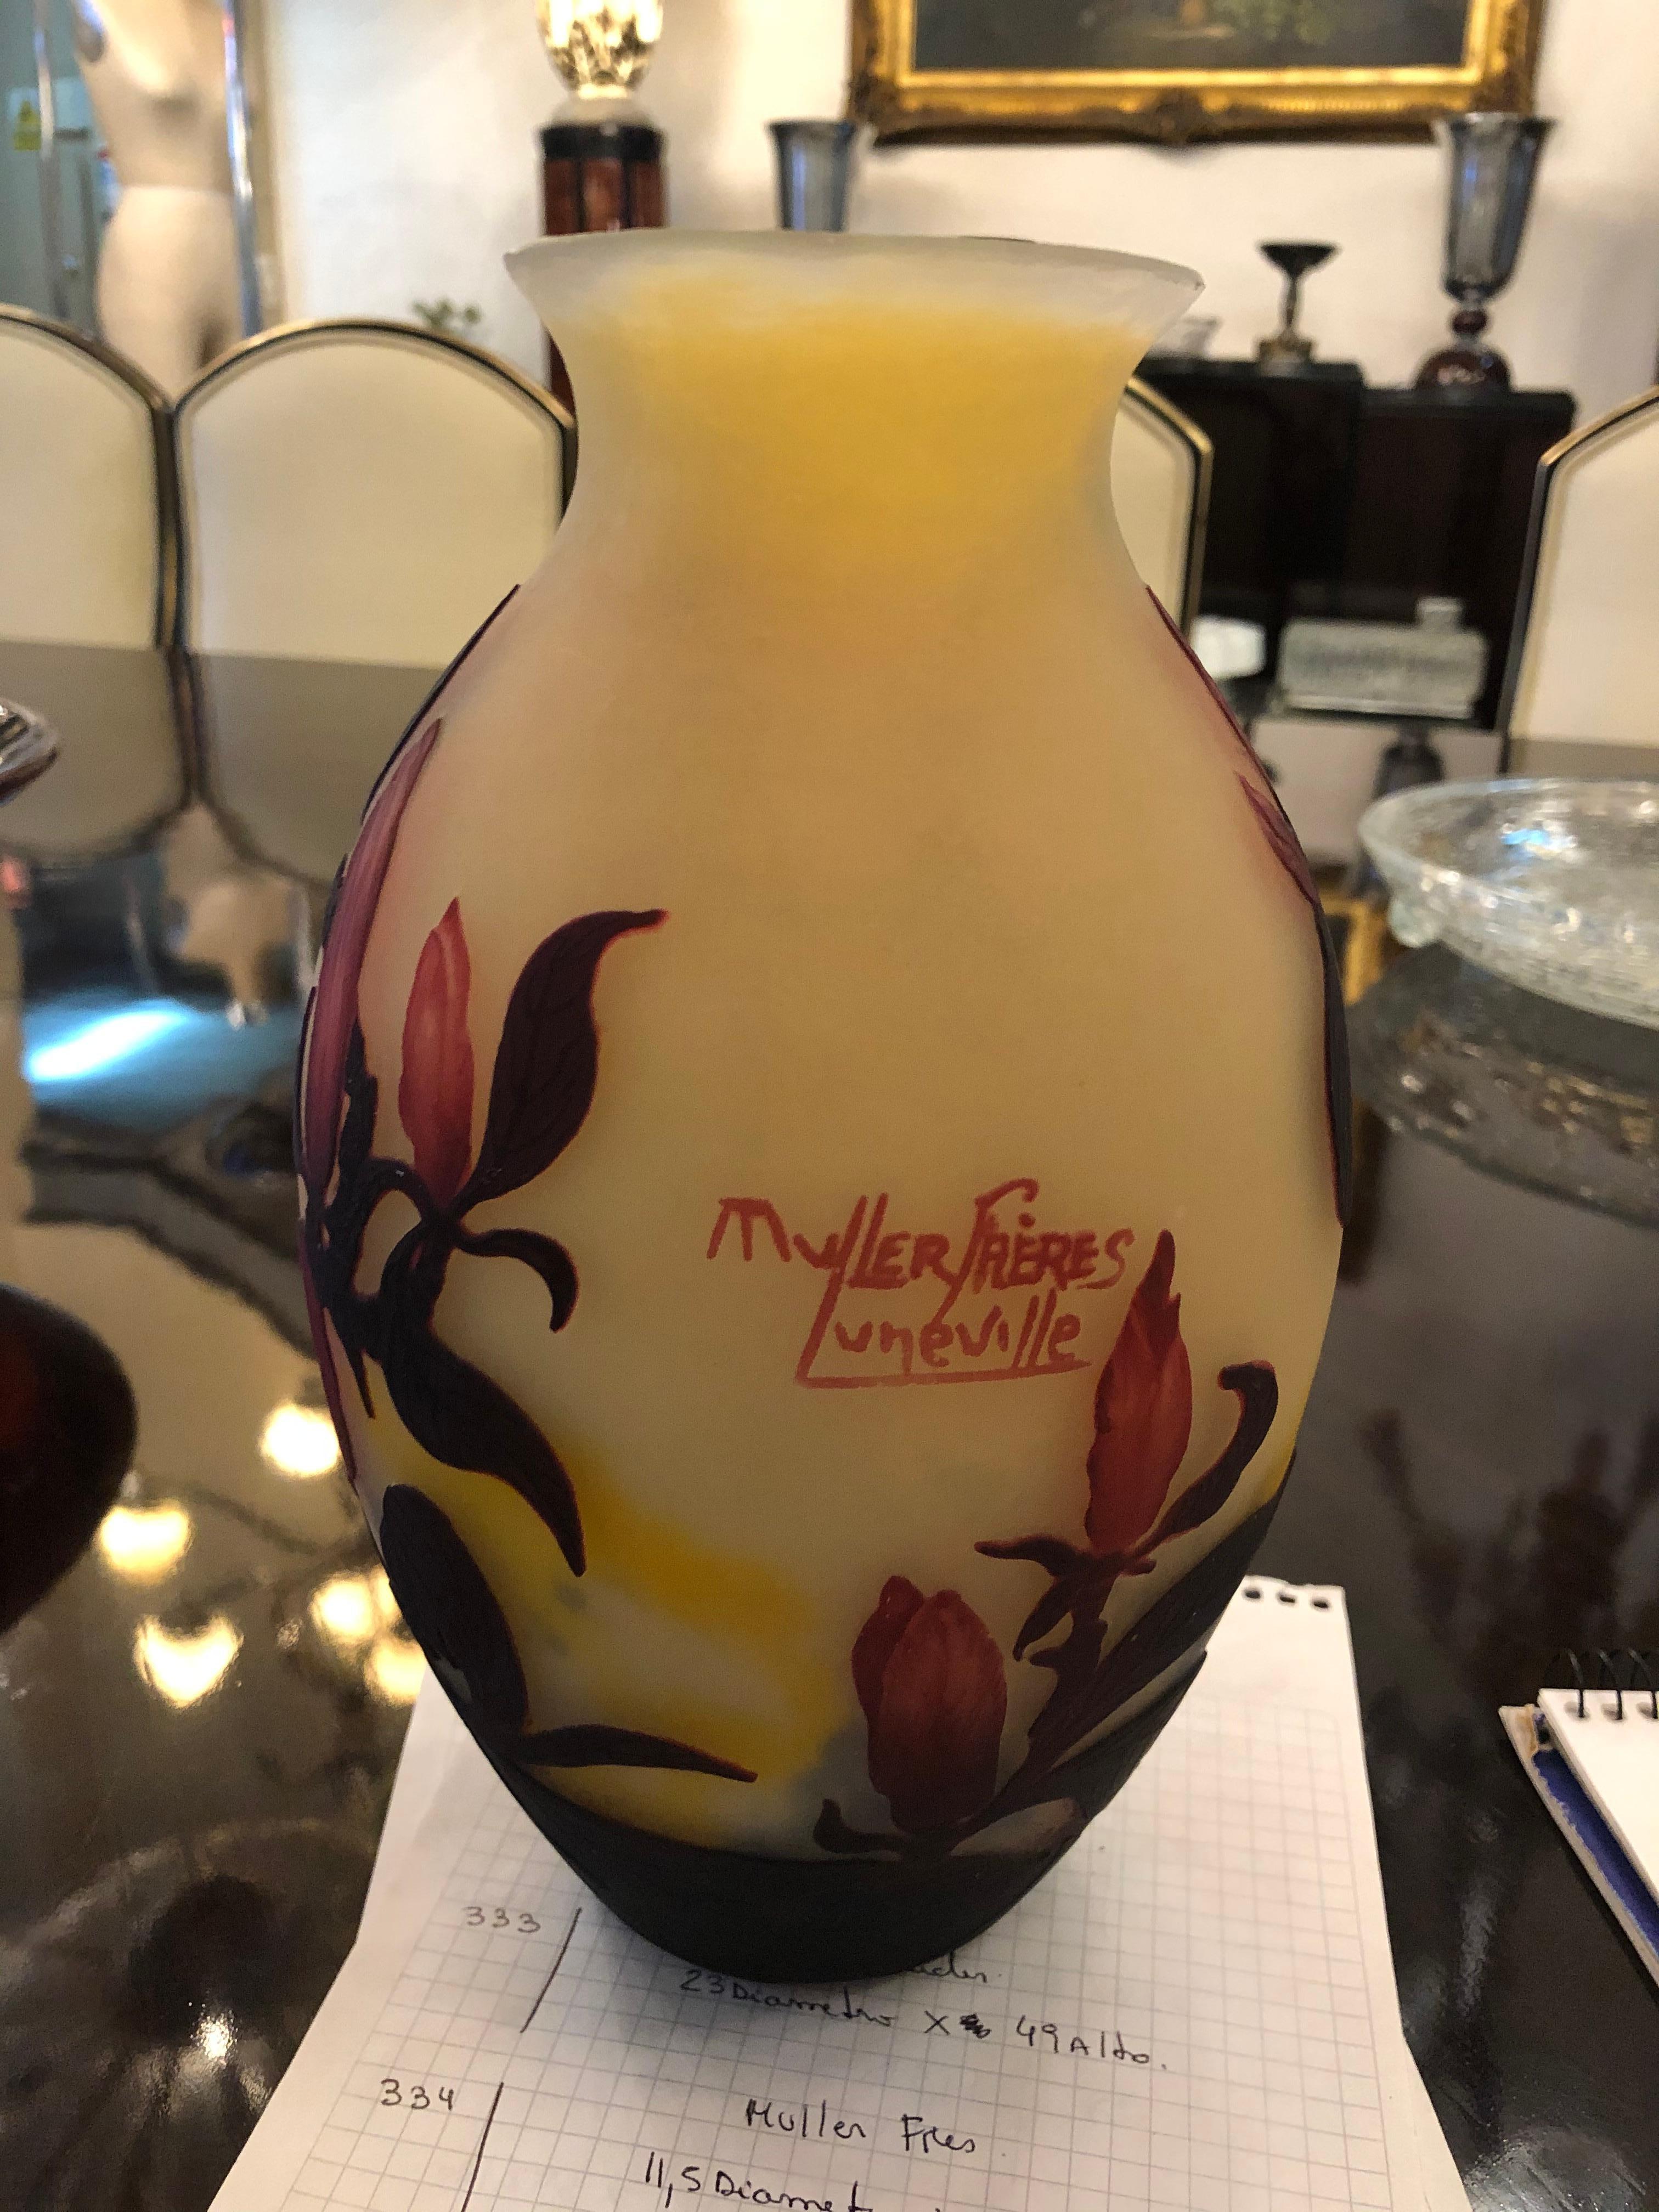 Vase Sign: Muller Freres Luneville
acid worked
Muller Feres
The heart of the company was formed by five brothers (Henri, Desire, Eugene, Pierre, Victor) from a glass making family who trained and worked at the Galle factory. Henri set up a